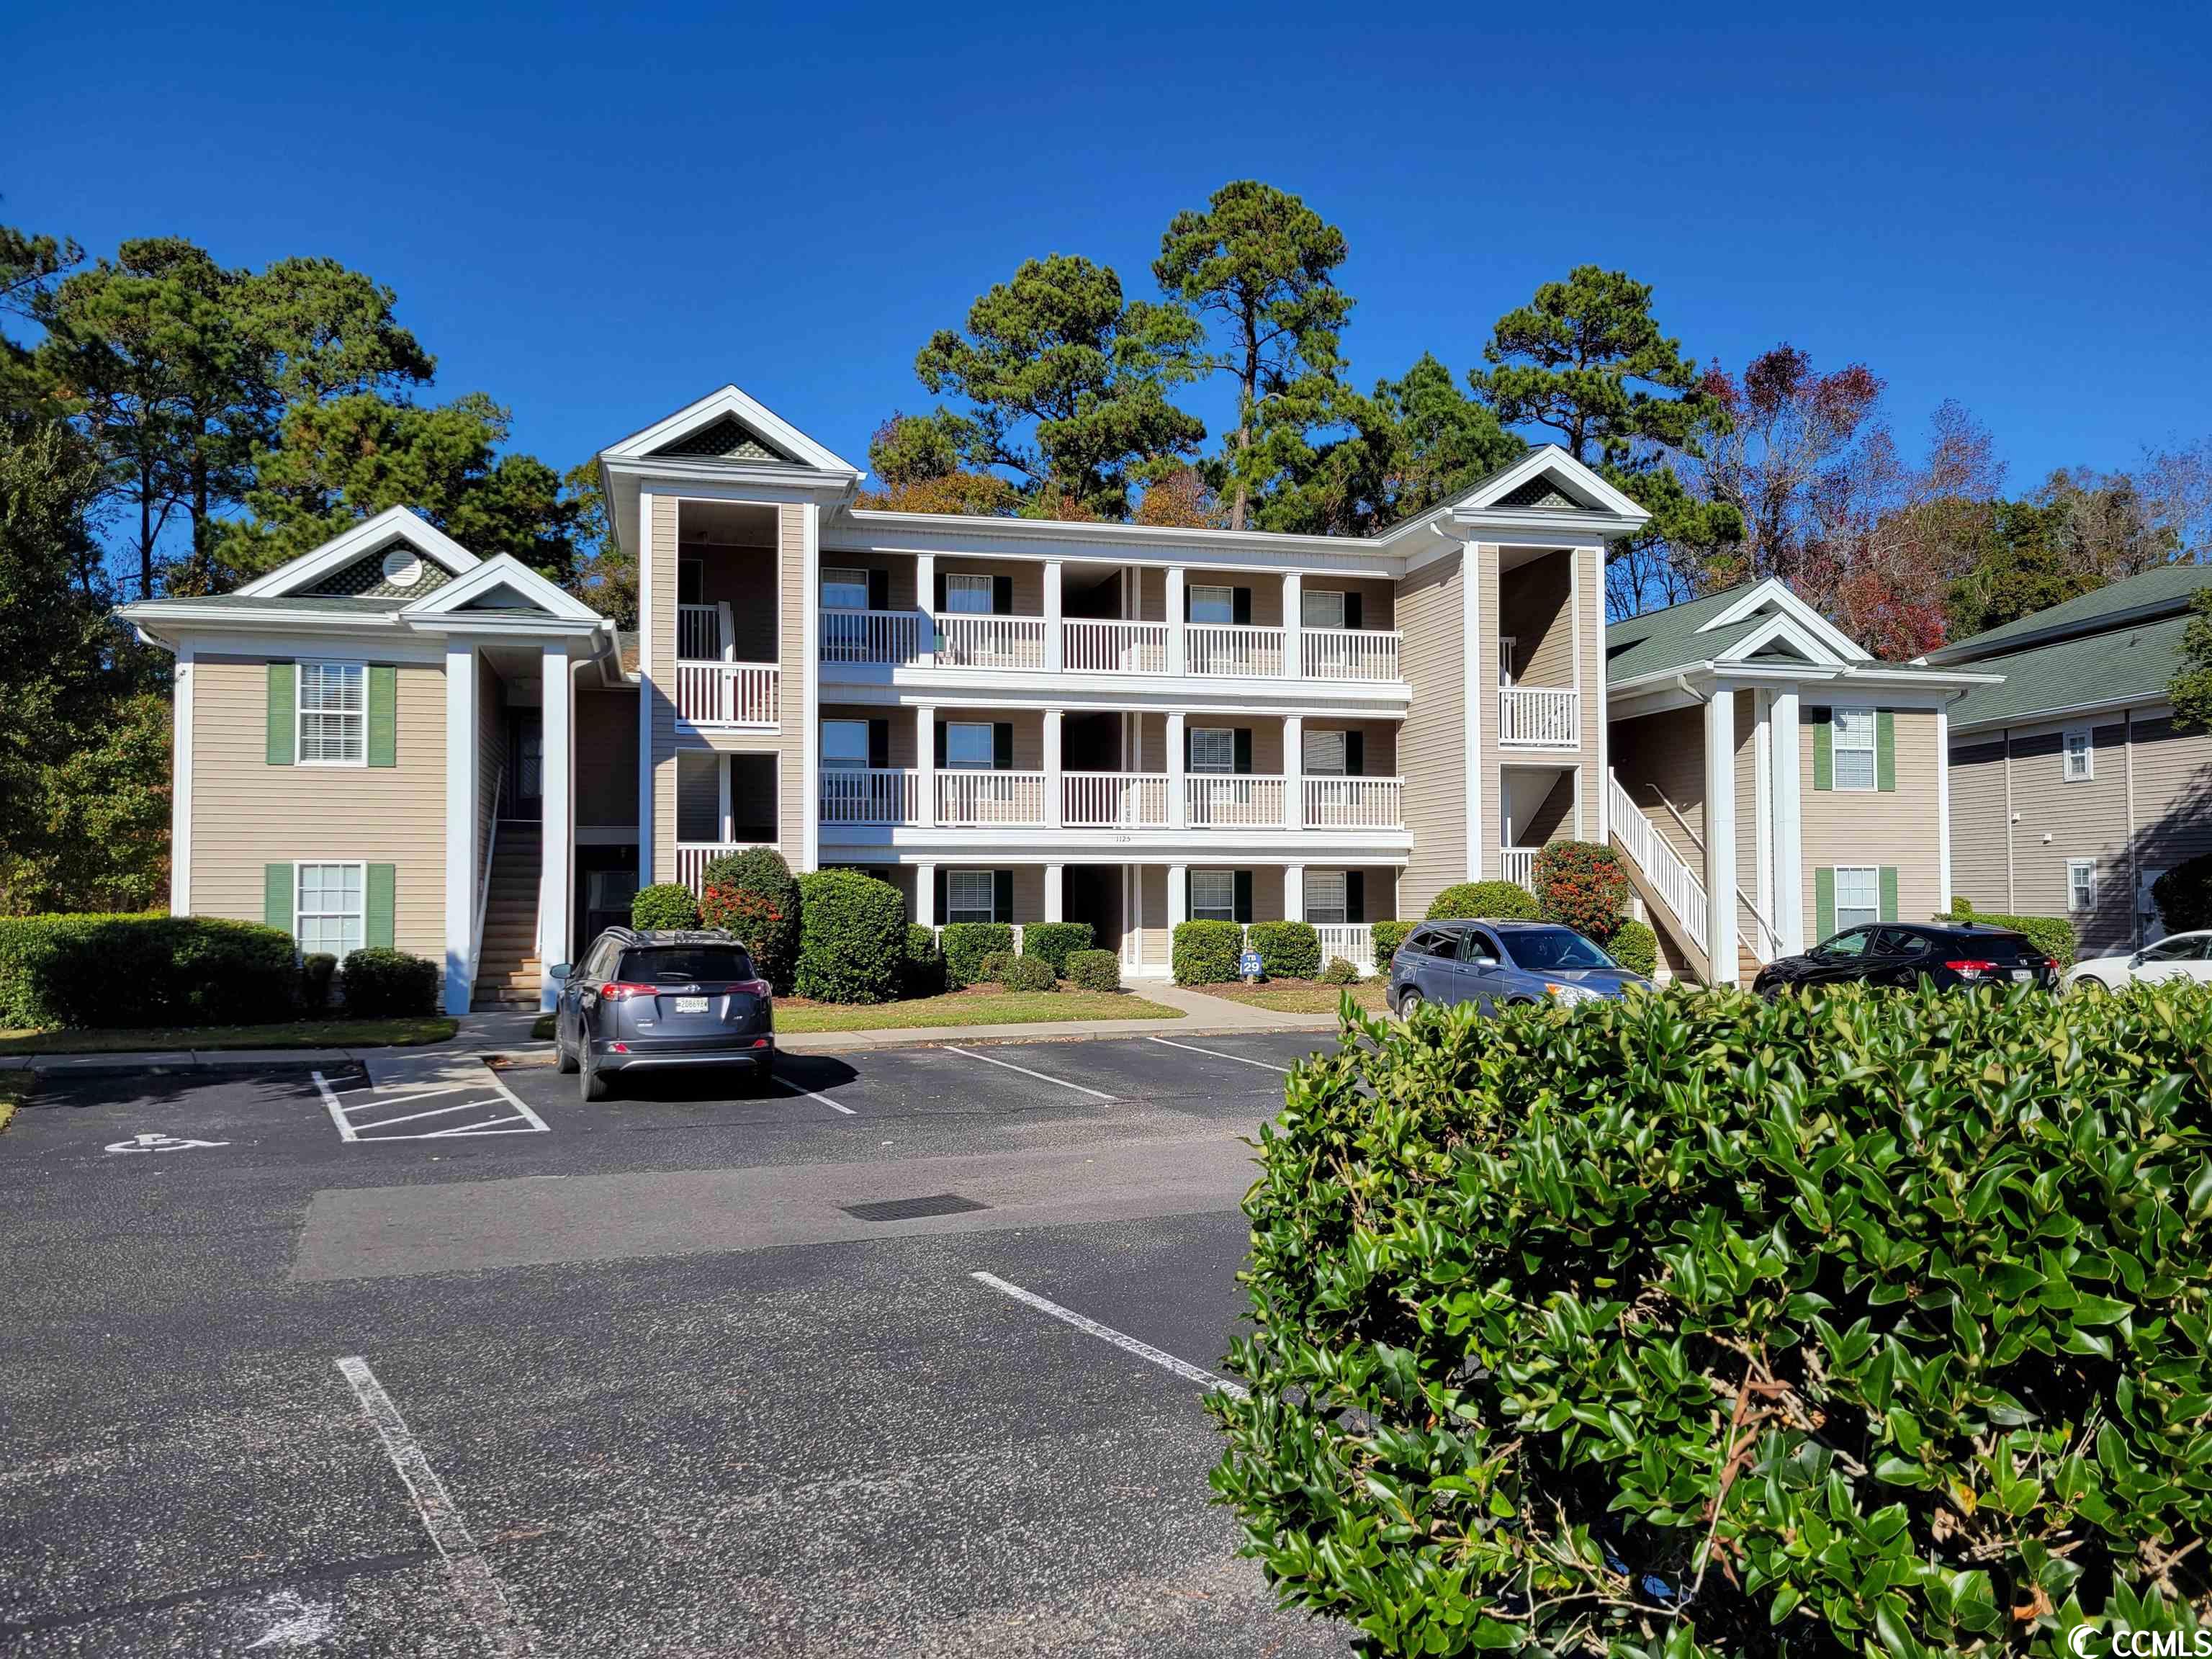 top floor true blue condo boasts single-level living on the third floor. features vaulted ceiling and screened porch with private treetop setting. partially furnished open-concept floor plan offers three bedrooms and two full bathrooms. ideal for year-round living or for second home getaways or rentals. community pools and tennis courts nearby. hoa fee includes exterior building insurance, internet, cable, water and sewer. close proximity to the true blue and caledonia golf courses. easy drive to the beaches. convenient to shops and restaurants. myrtle beach is a 30-minute drive, and historic charleston is an easy day trip.